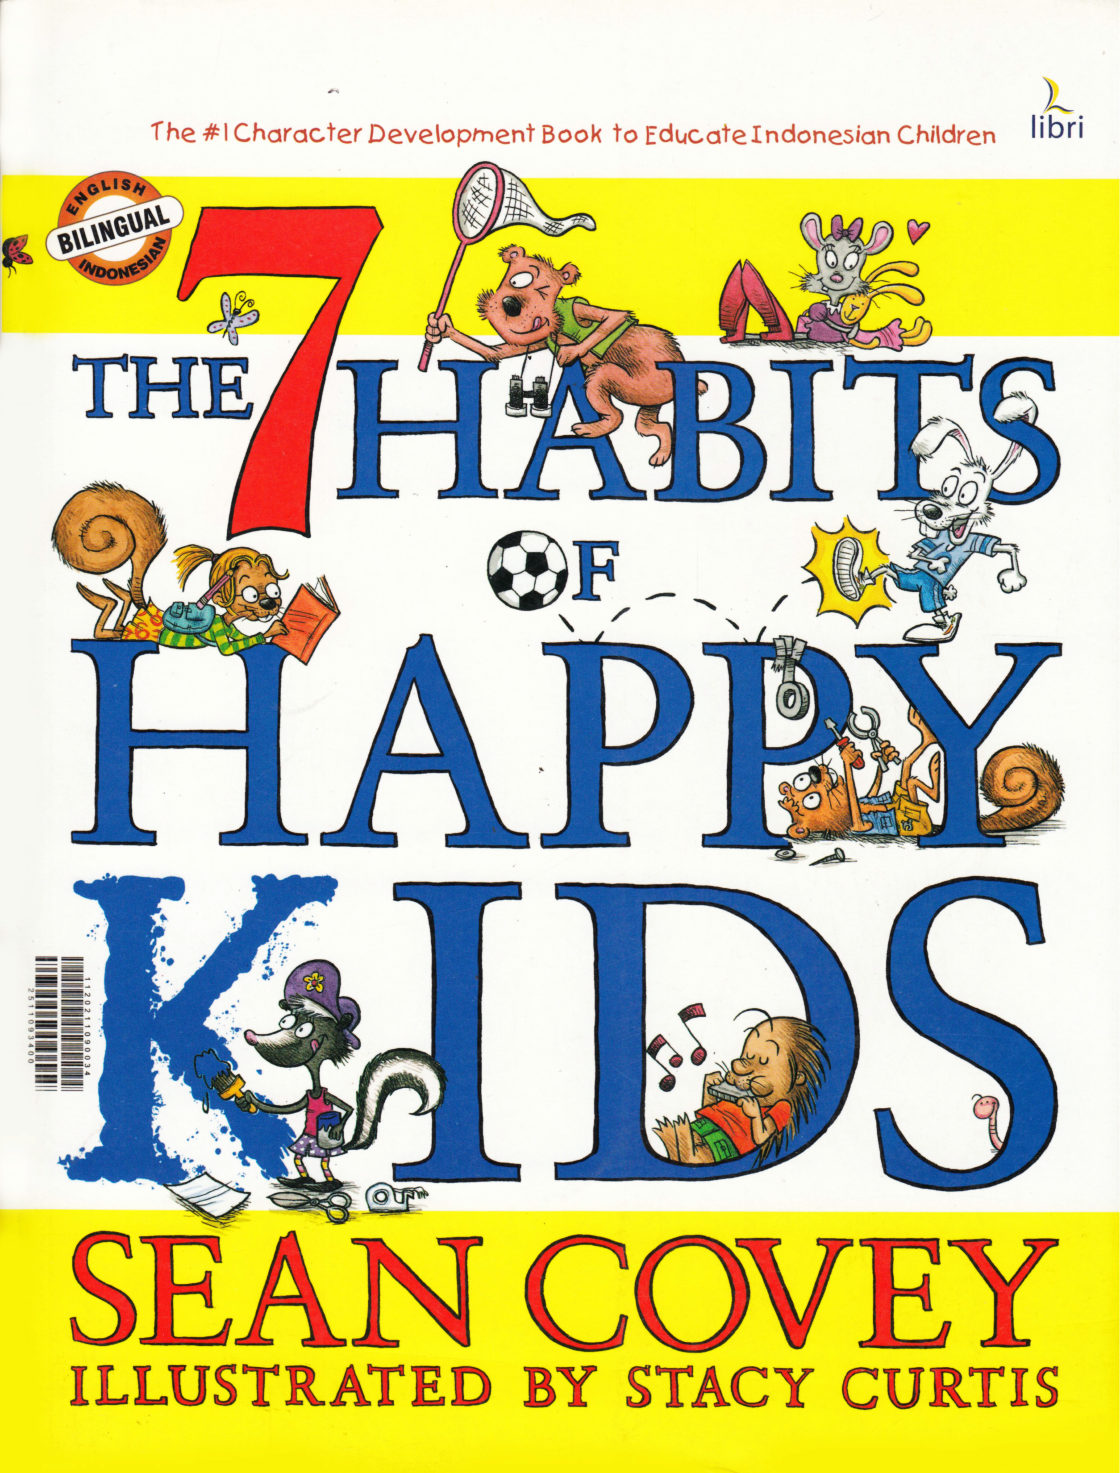 The 7 Habits of Happy Kids (Indonesian, Bilingual edition)